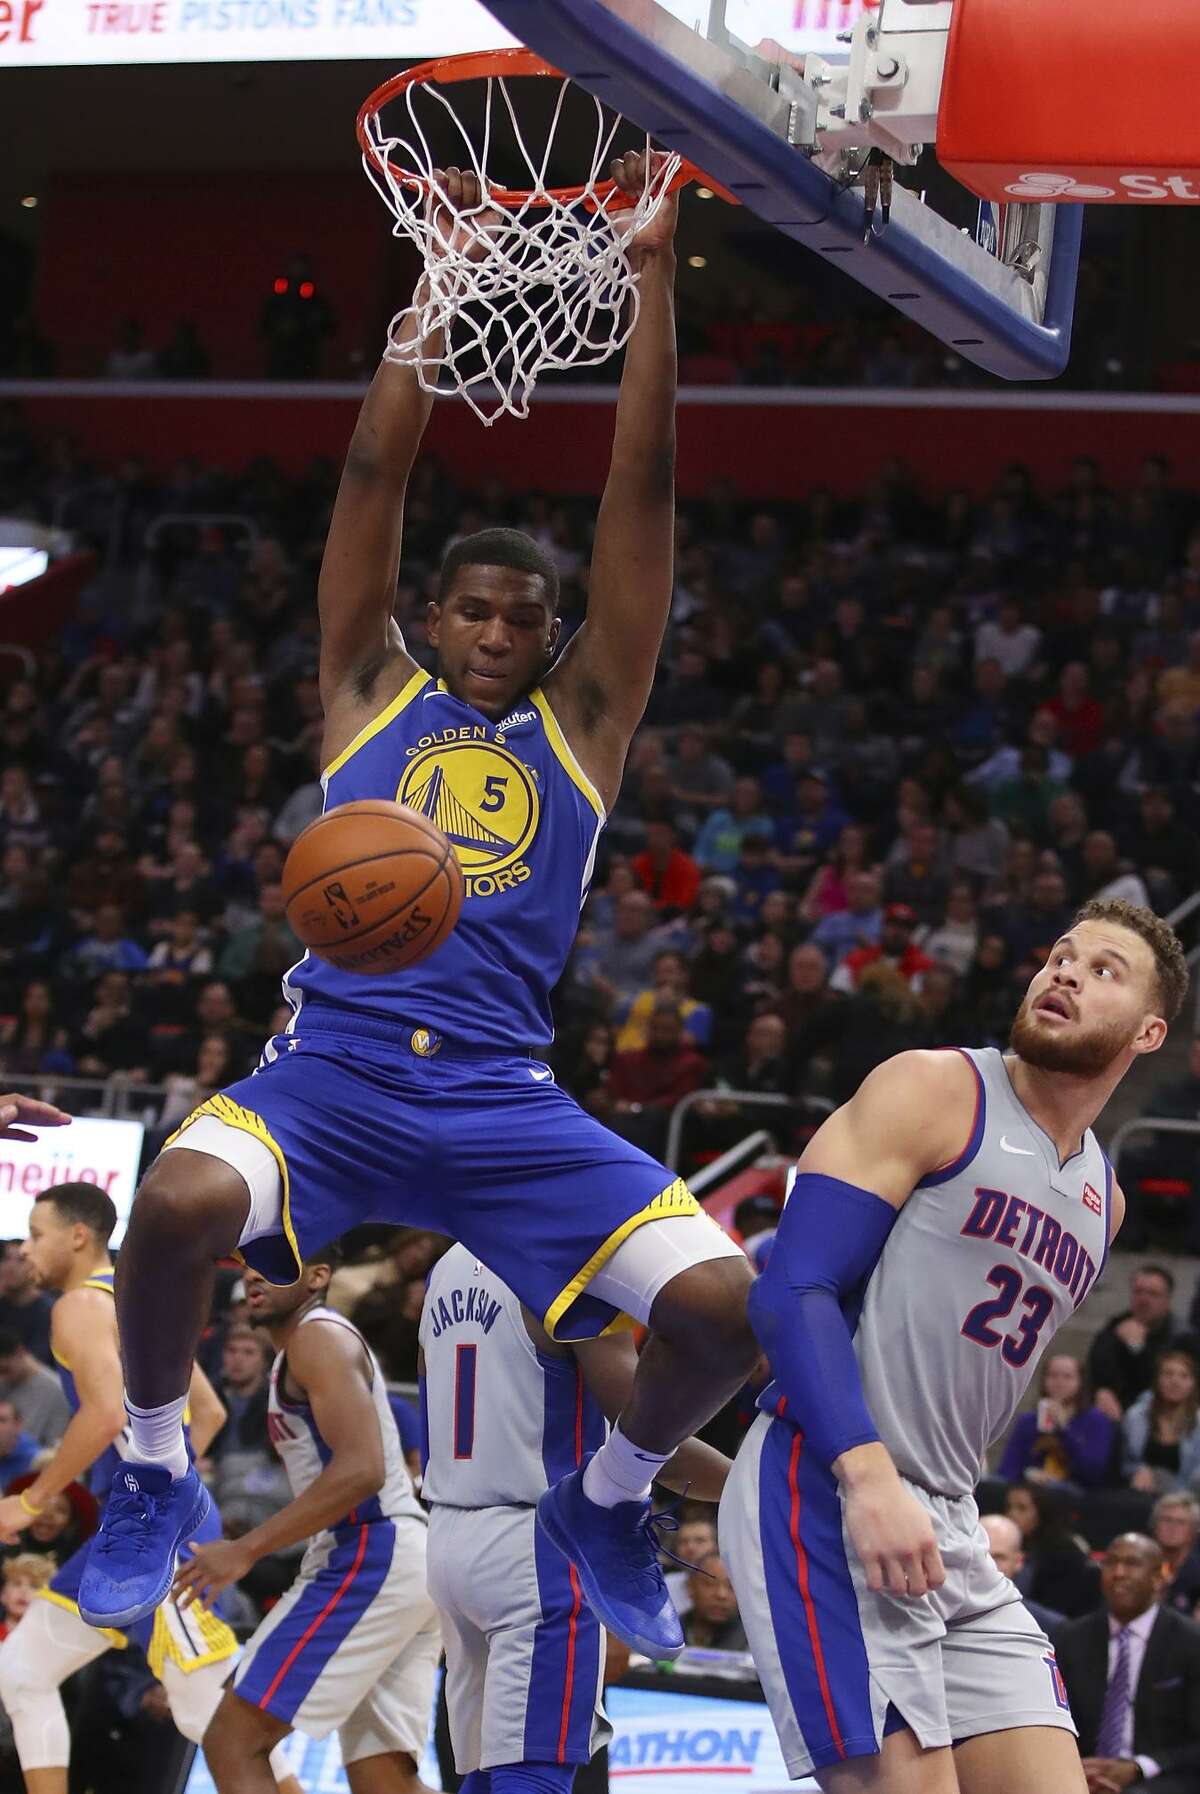 Warriors' Kevon Looney questionable for Game 7 with sore left toe